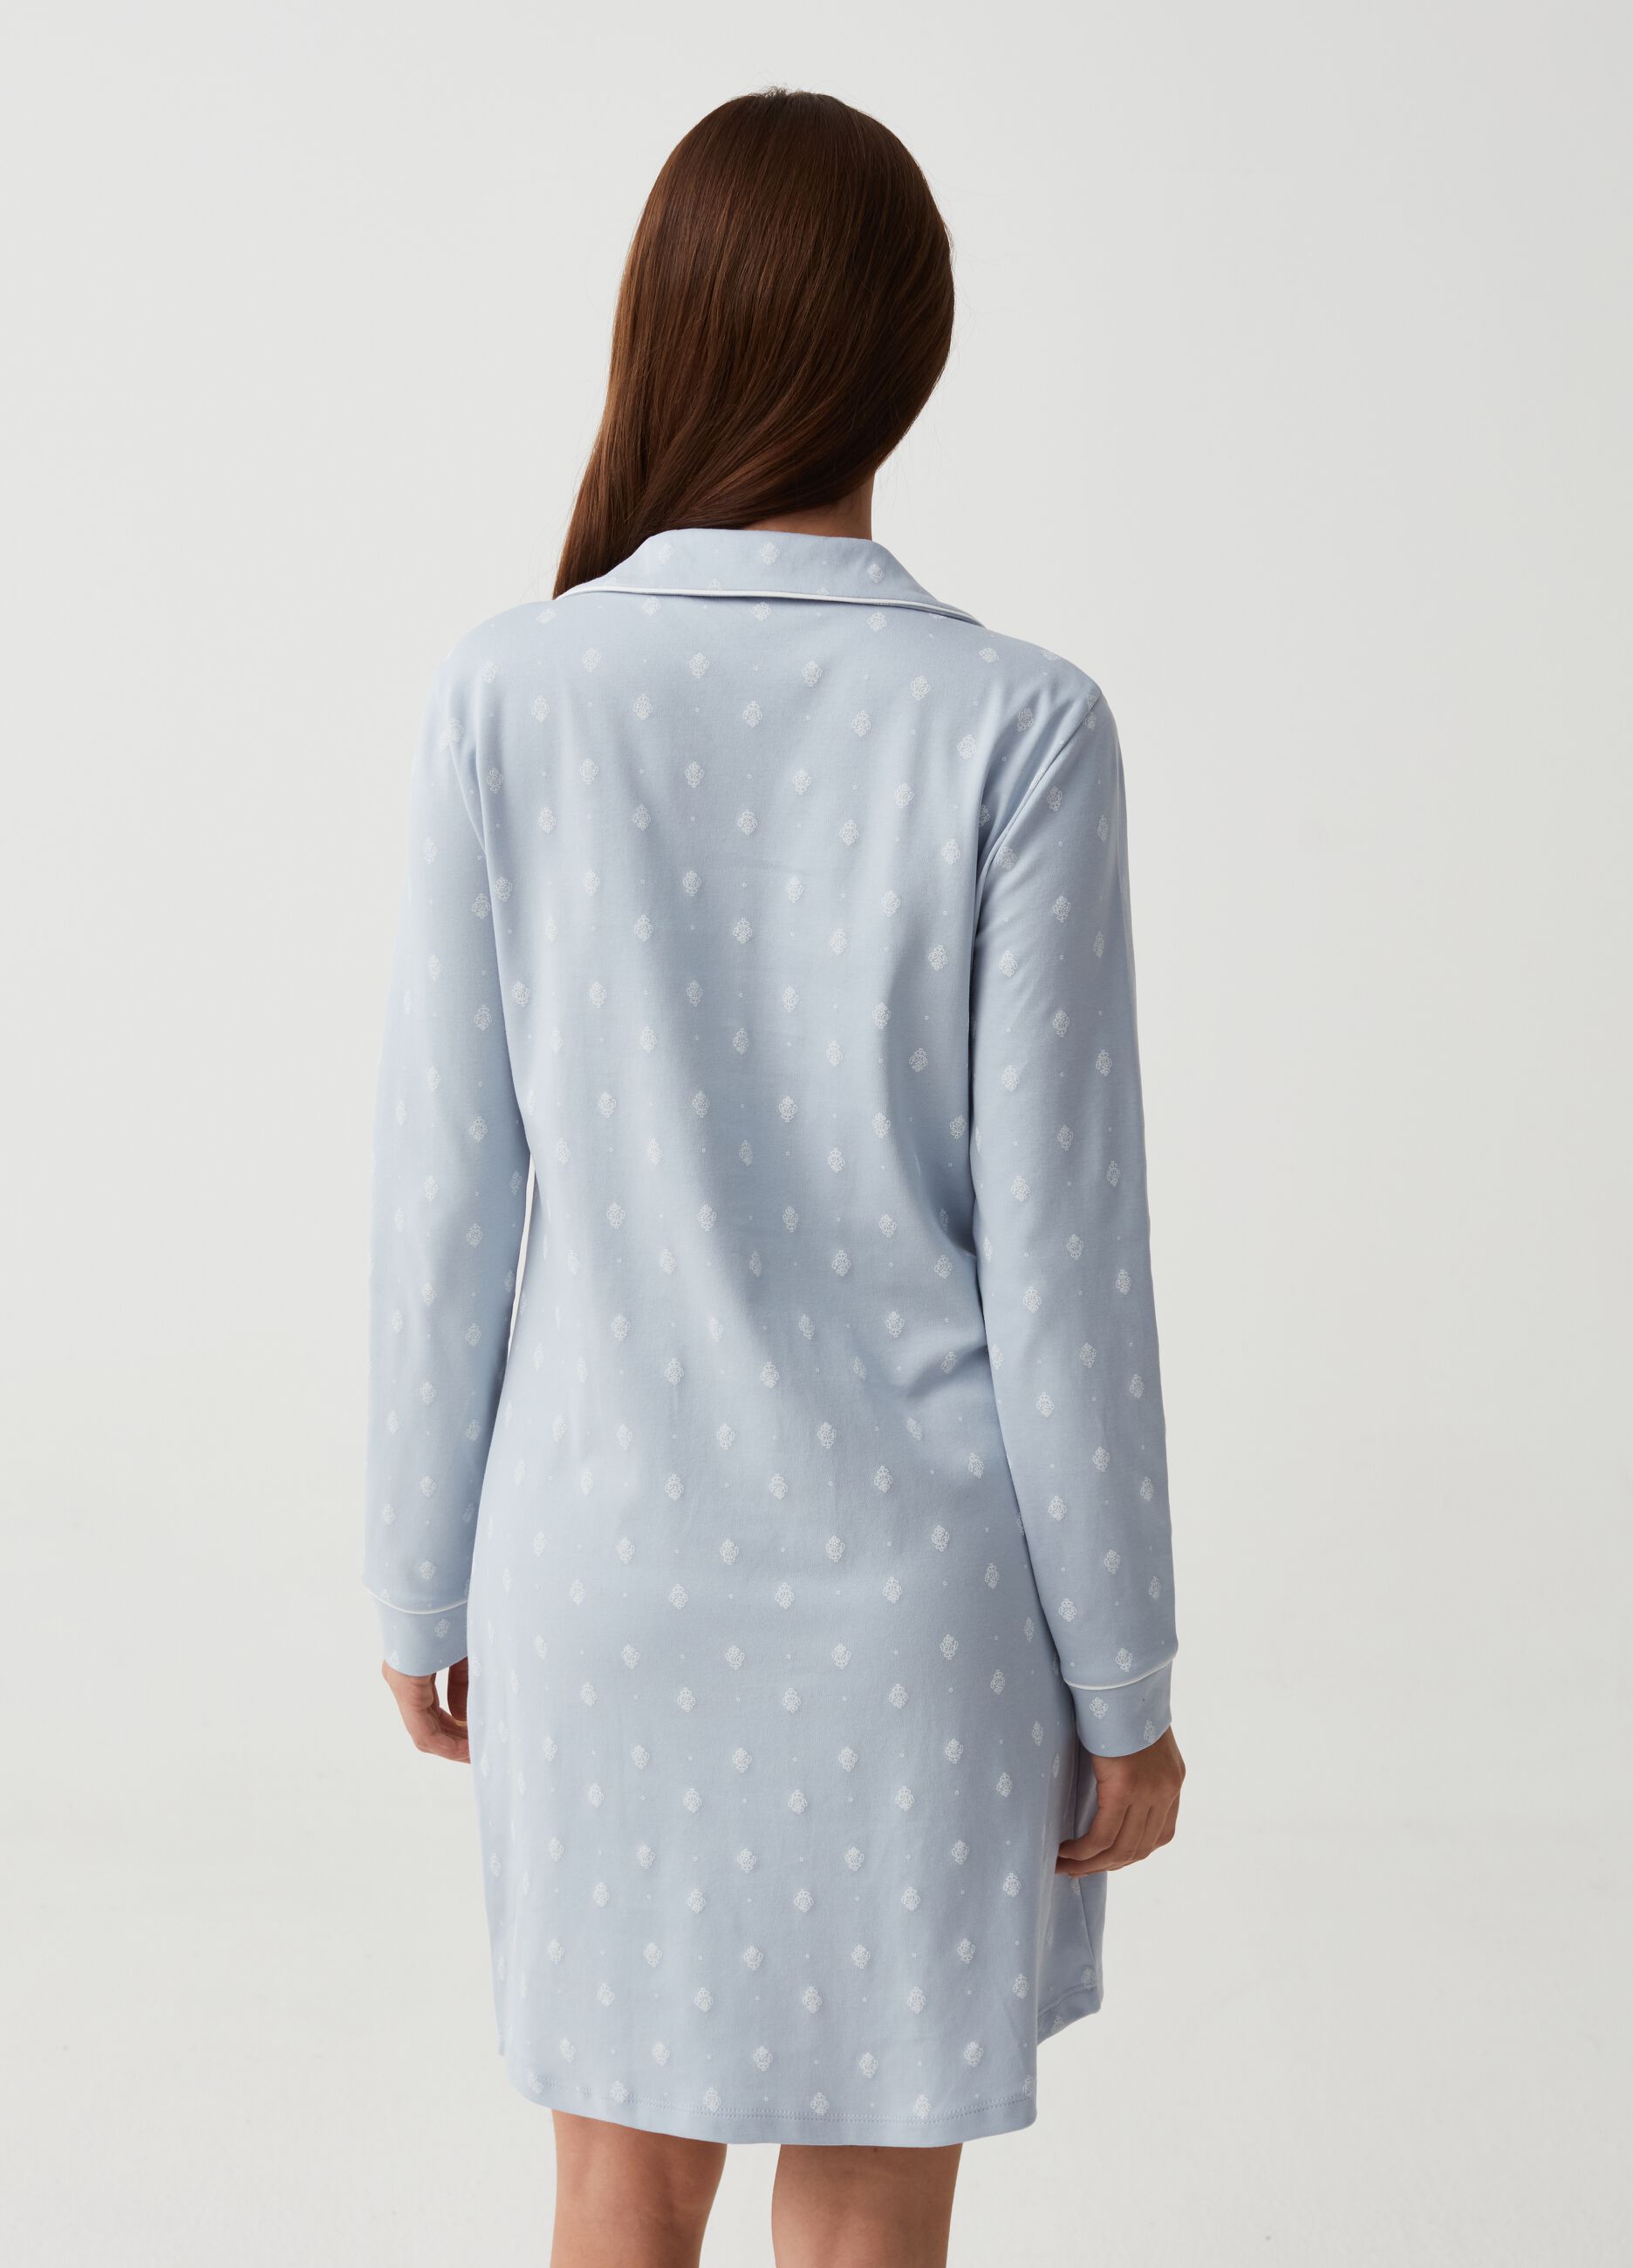 Nightdress with buttons and arabesque print